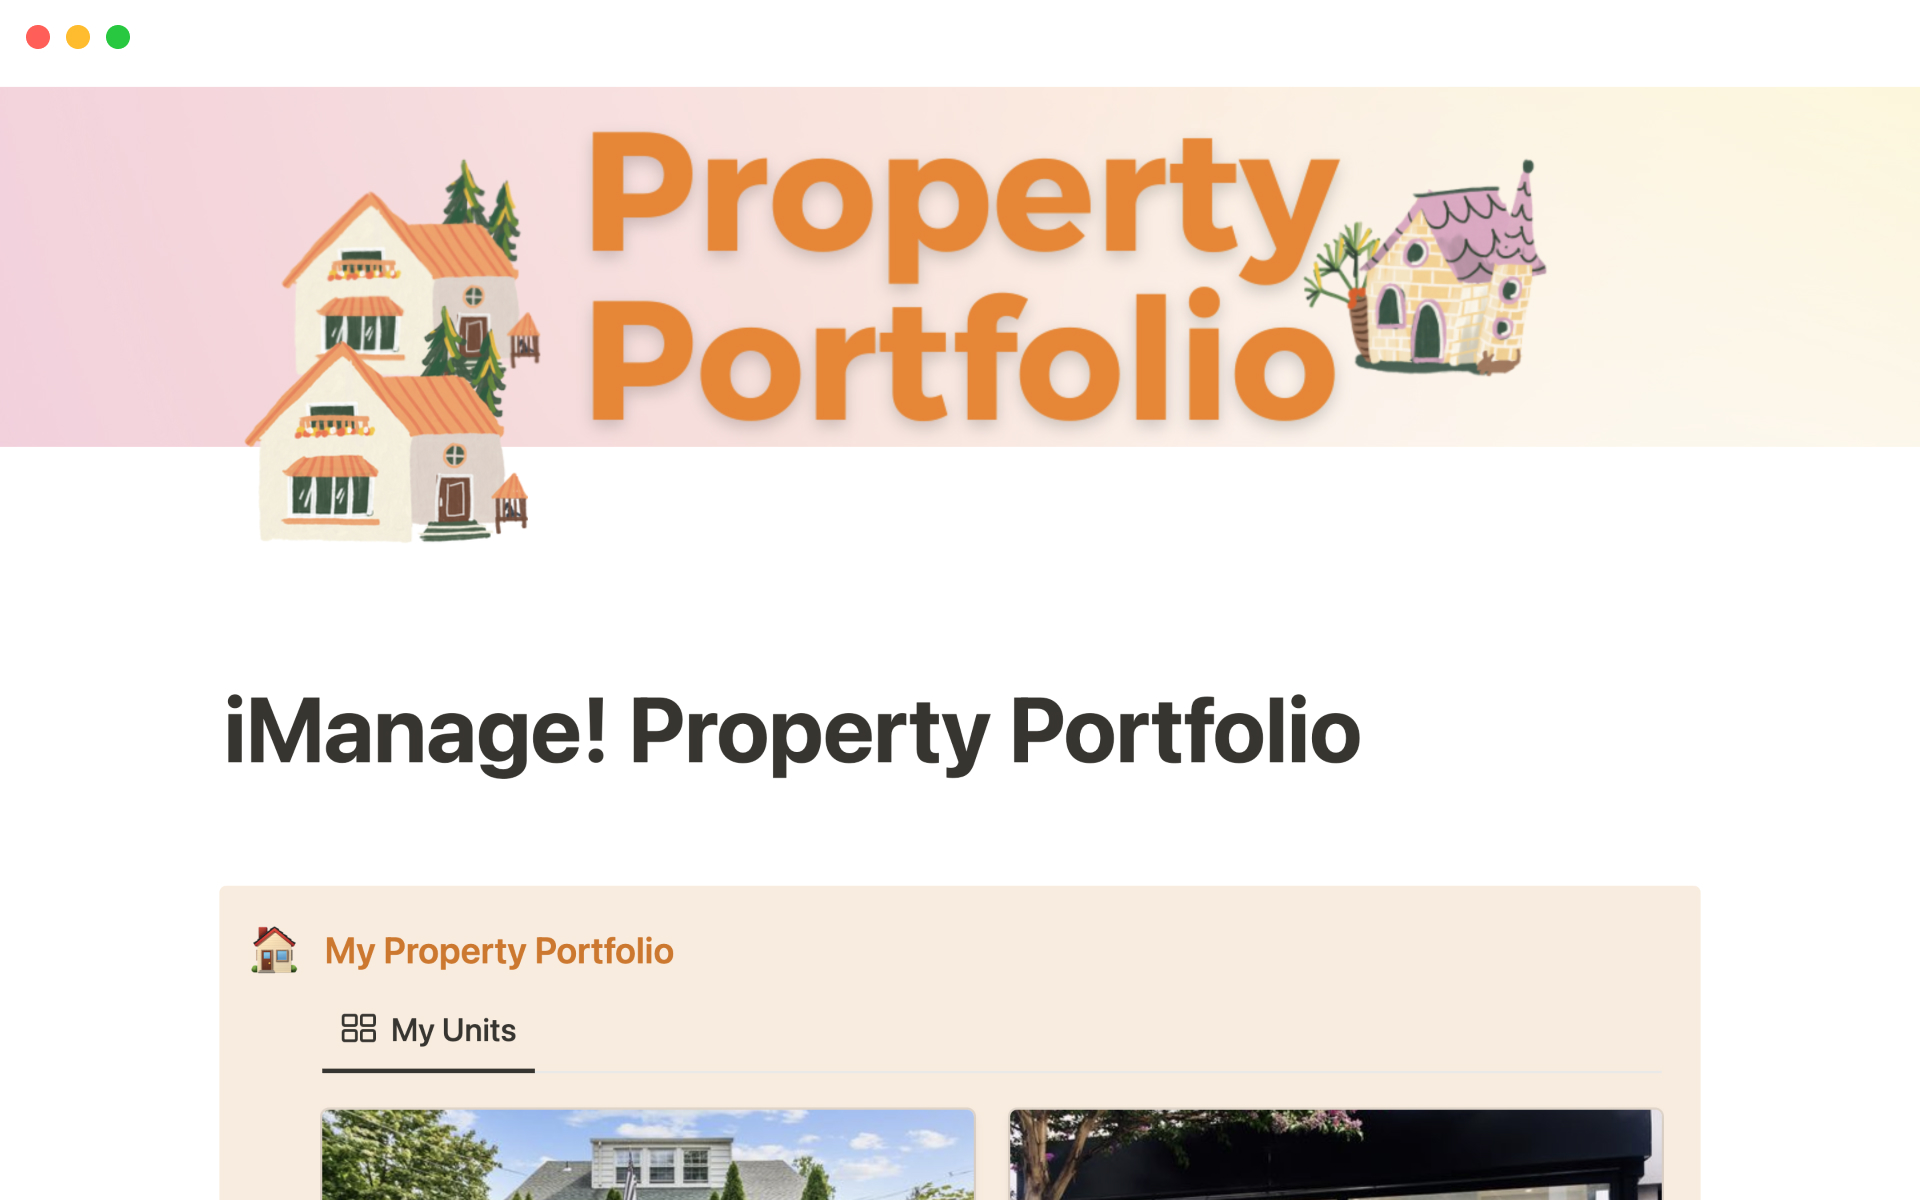 Track and manage your properties in one place. Add important information to have a clear overview of your portfolio.